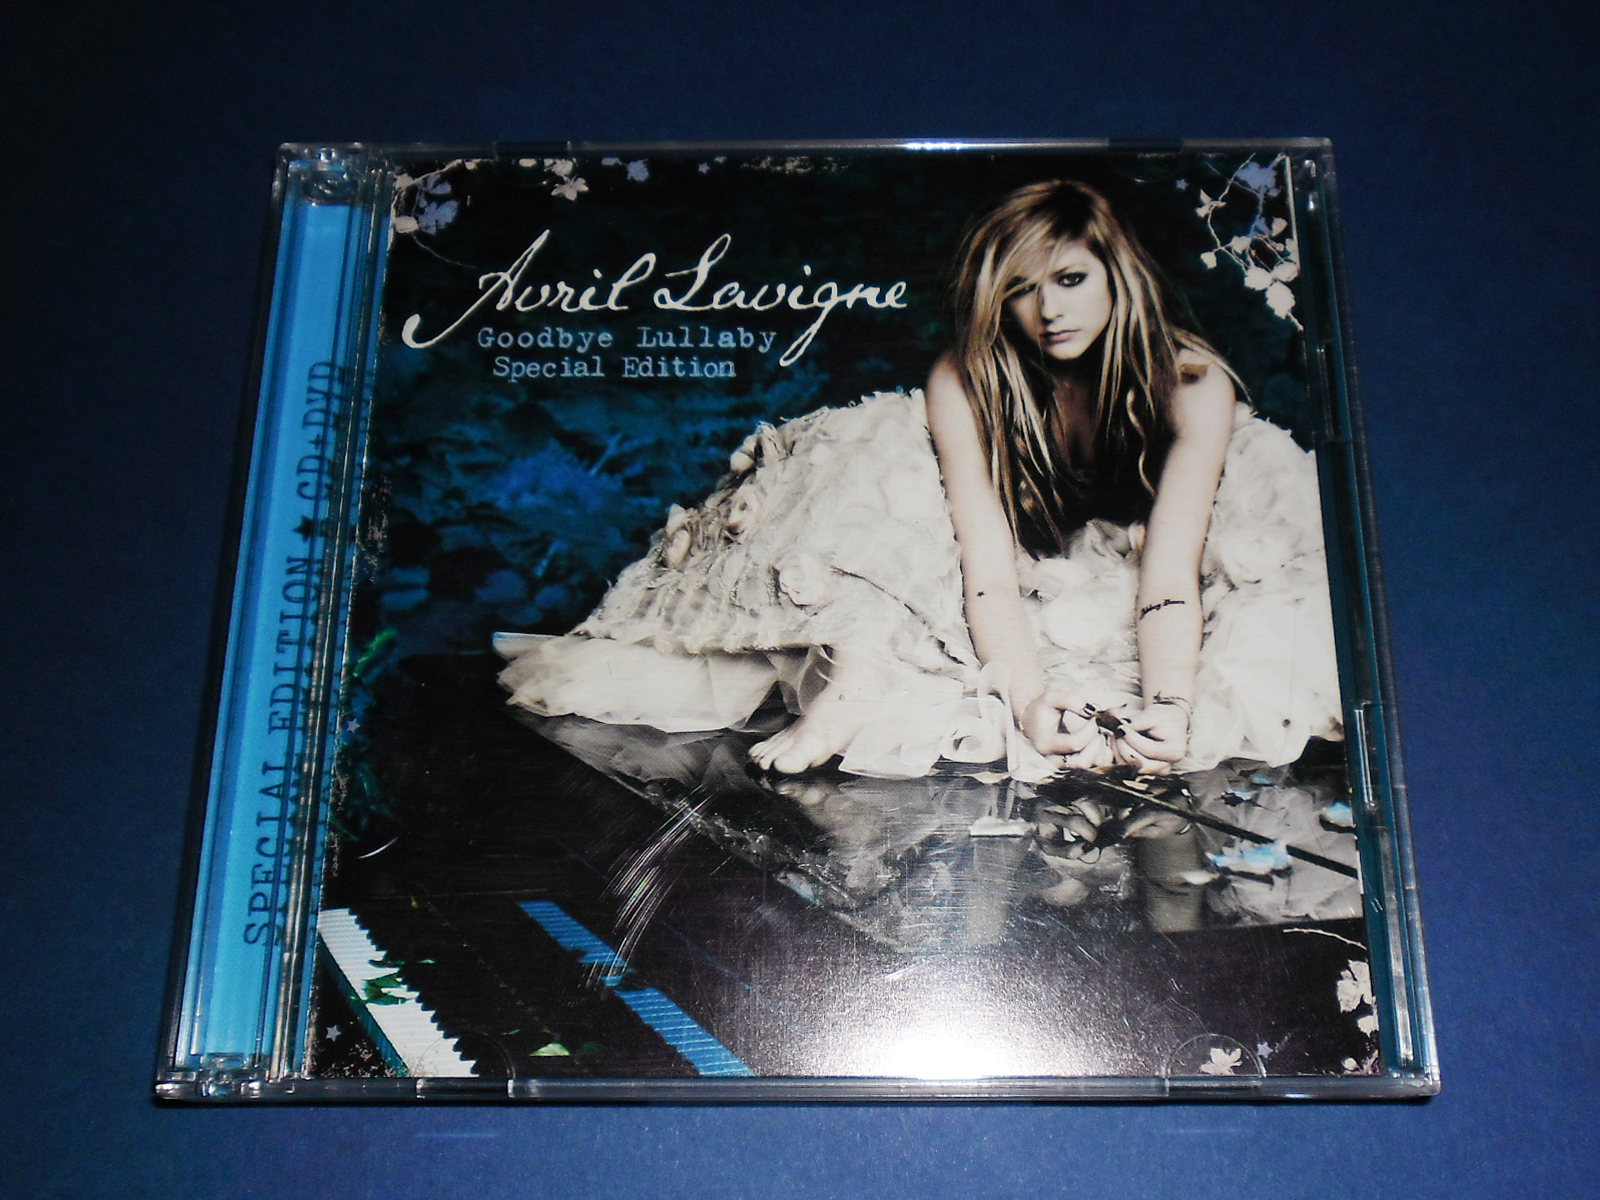 ADRIAN CD COLLECTION: Goodbye Lullaby - Special Edition